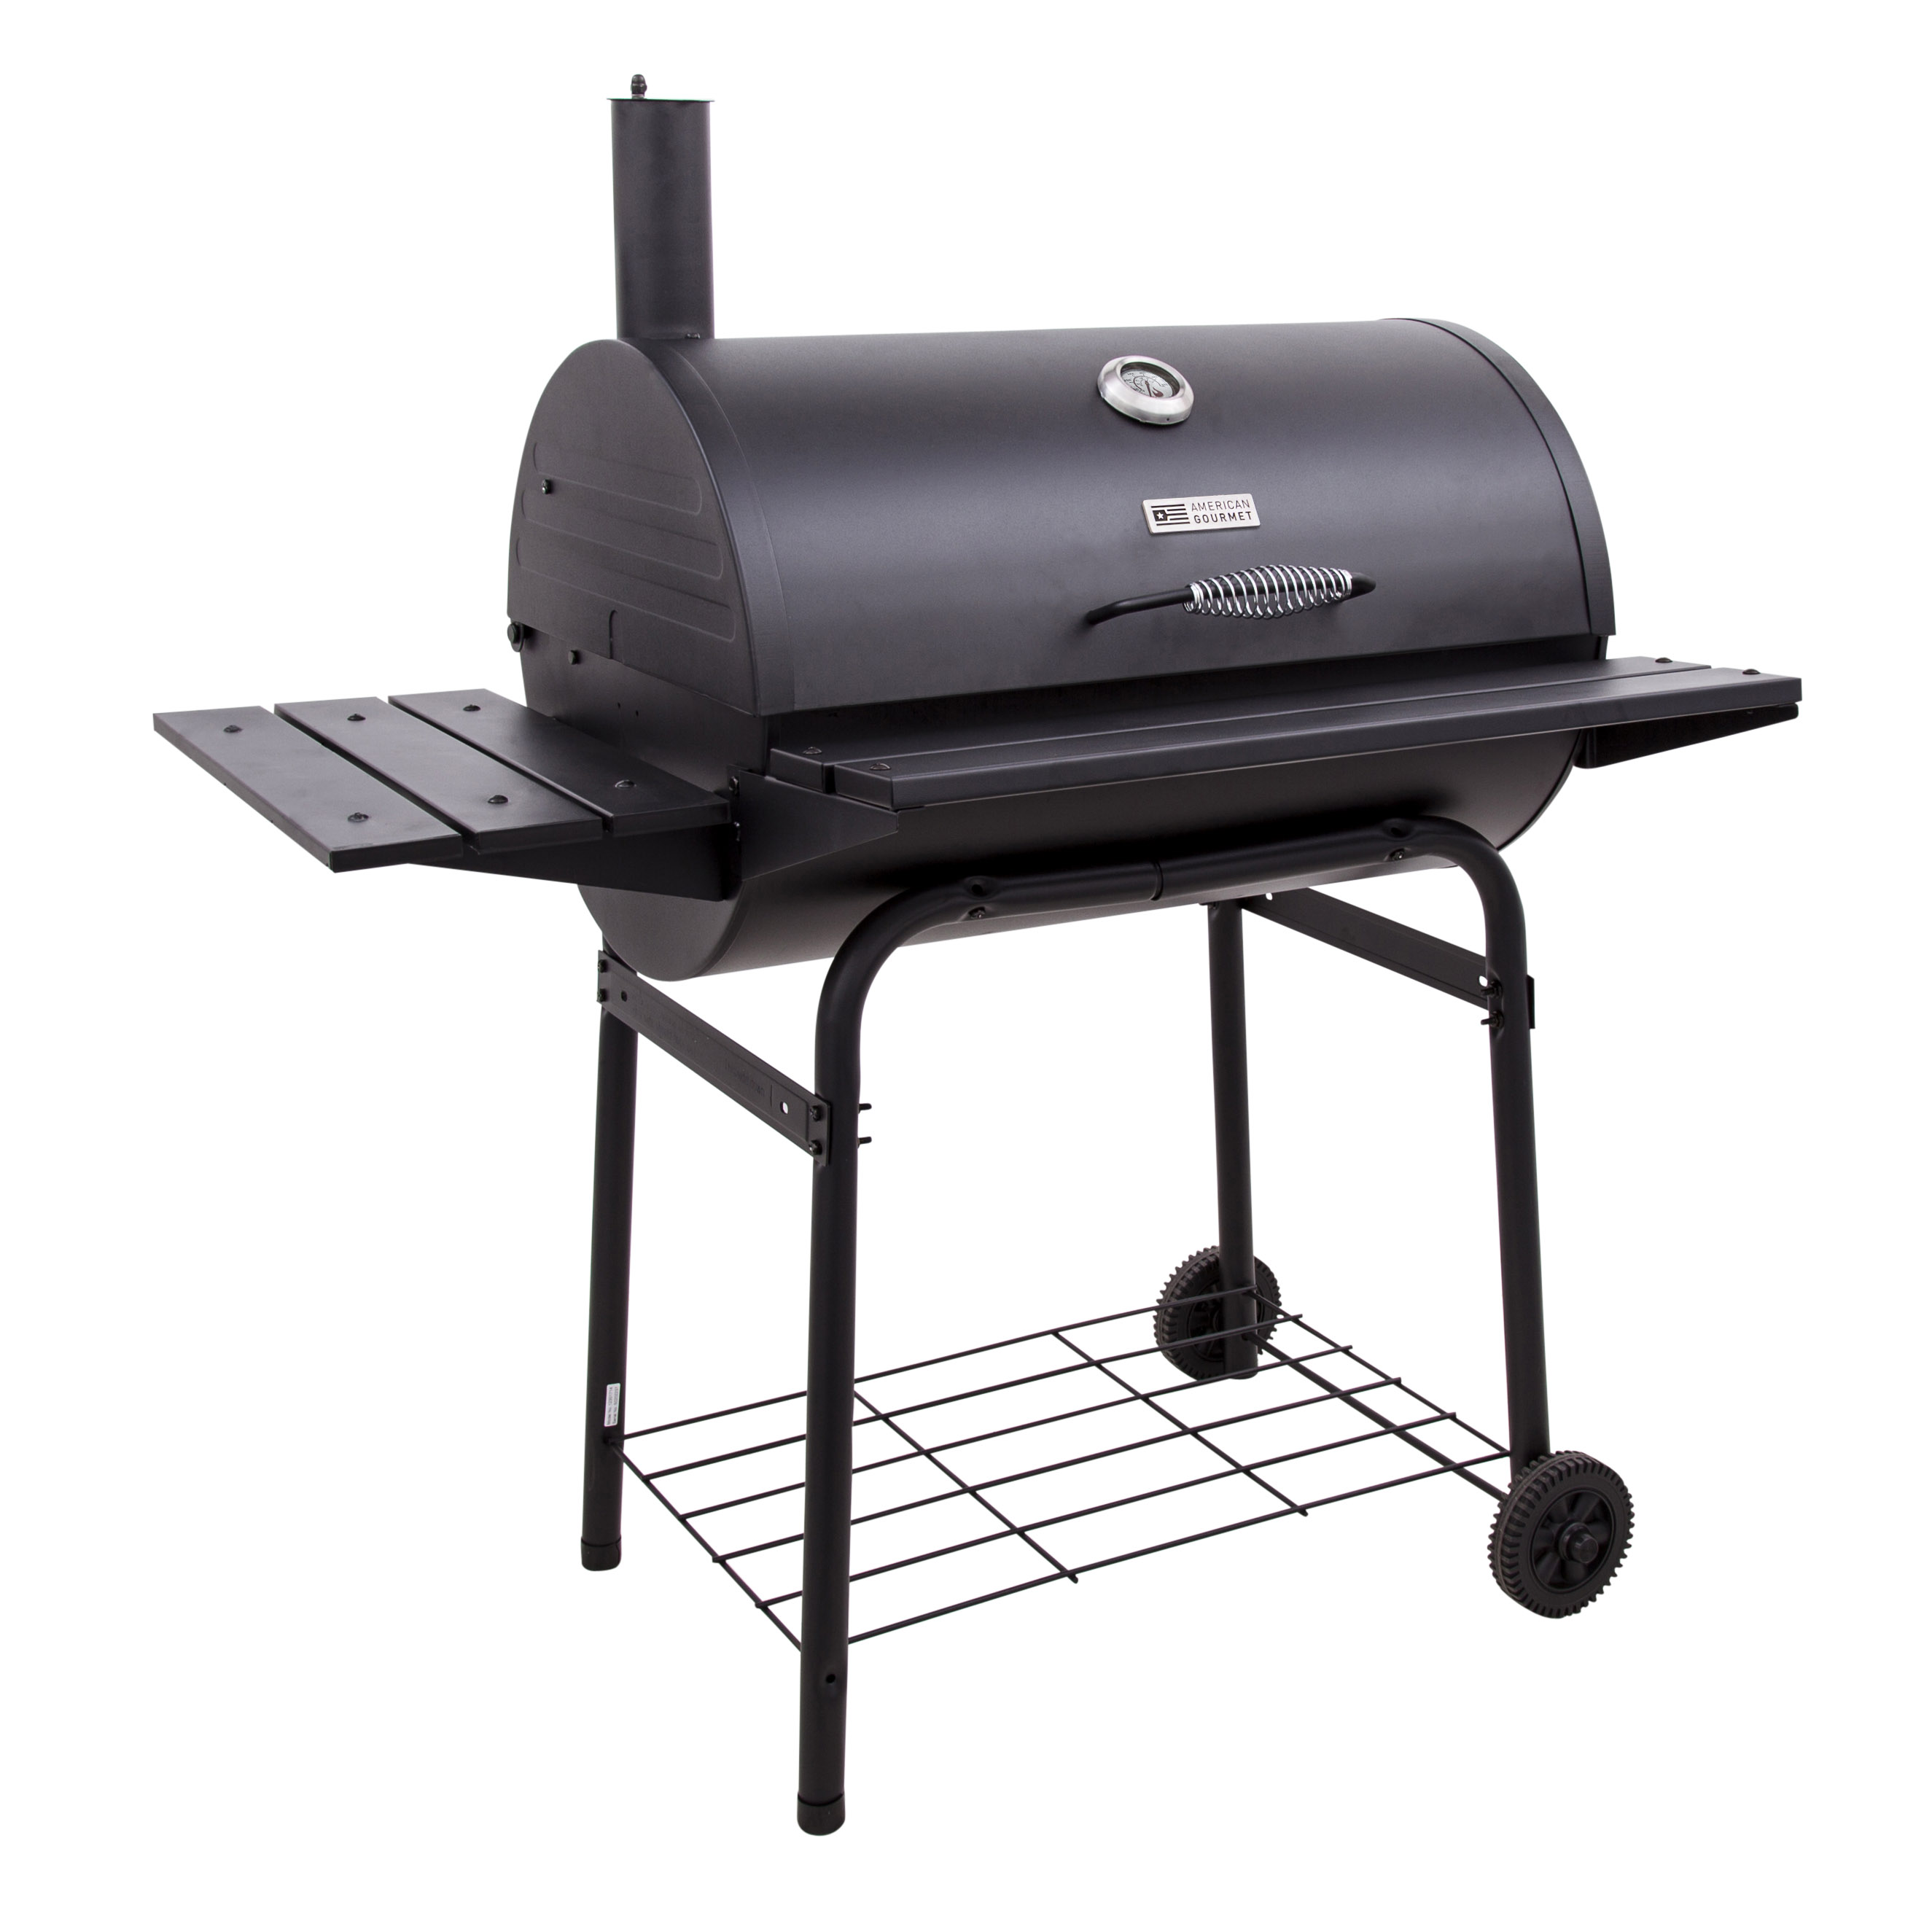 American Gourmet by Char-Broil 840 sq in Charcoal Barrel Outdoor Grill - image 2 of 9